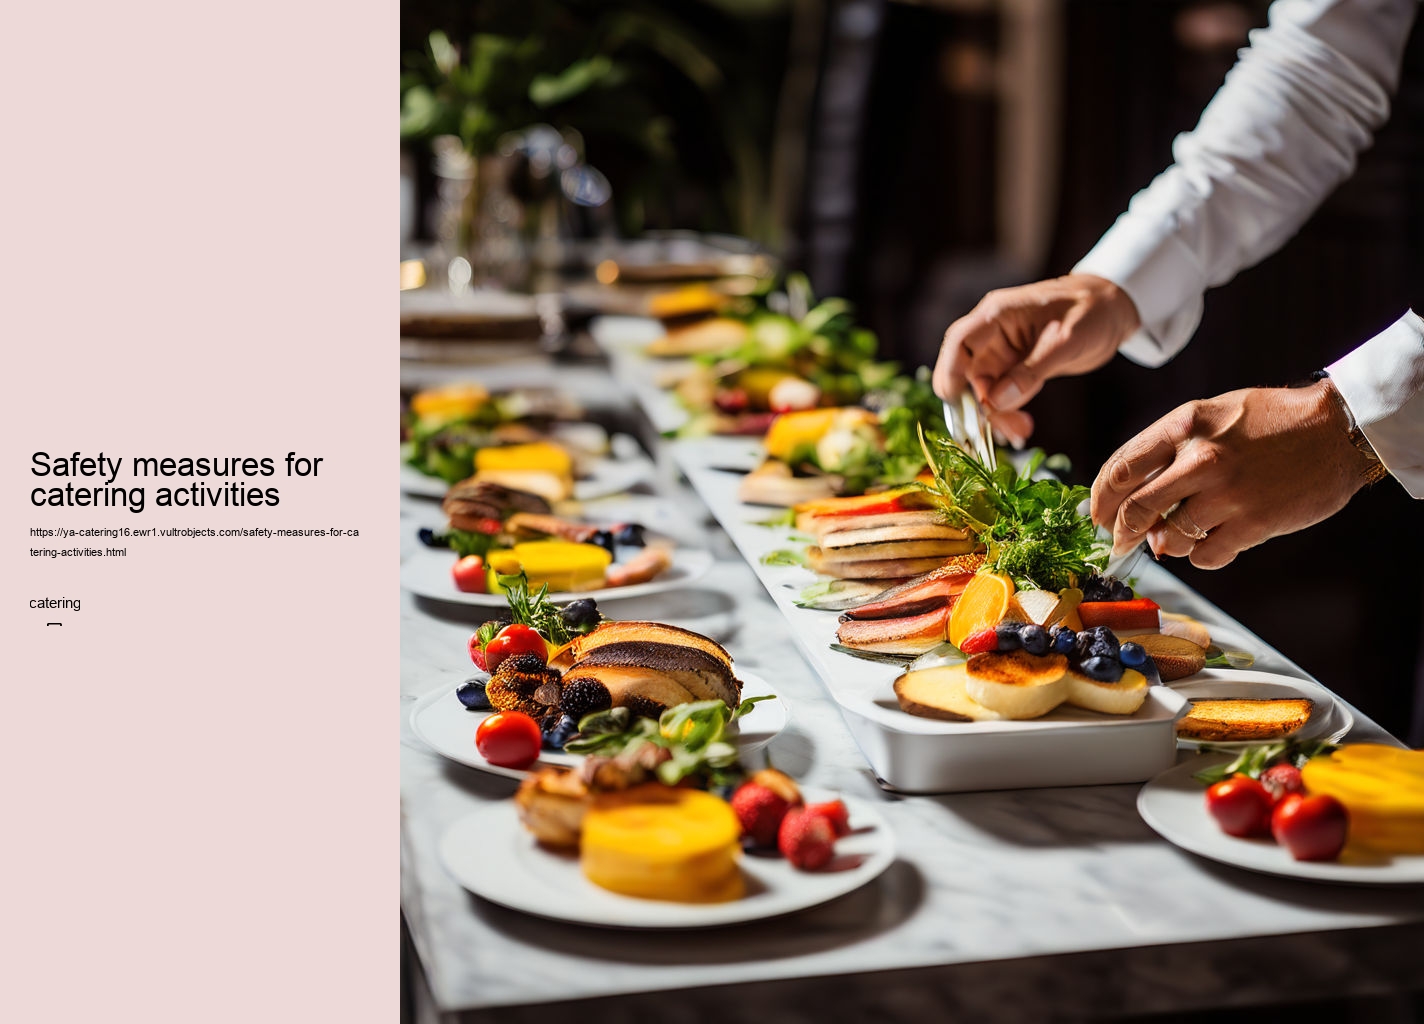 Safety measures for catering activities